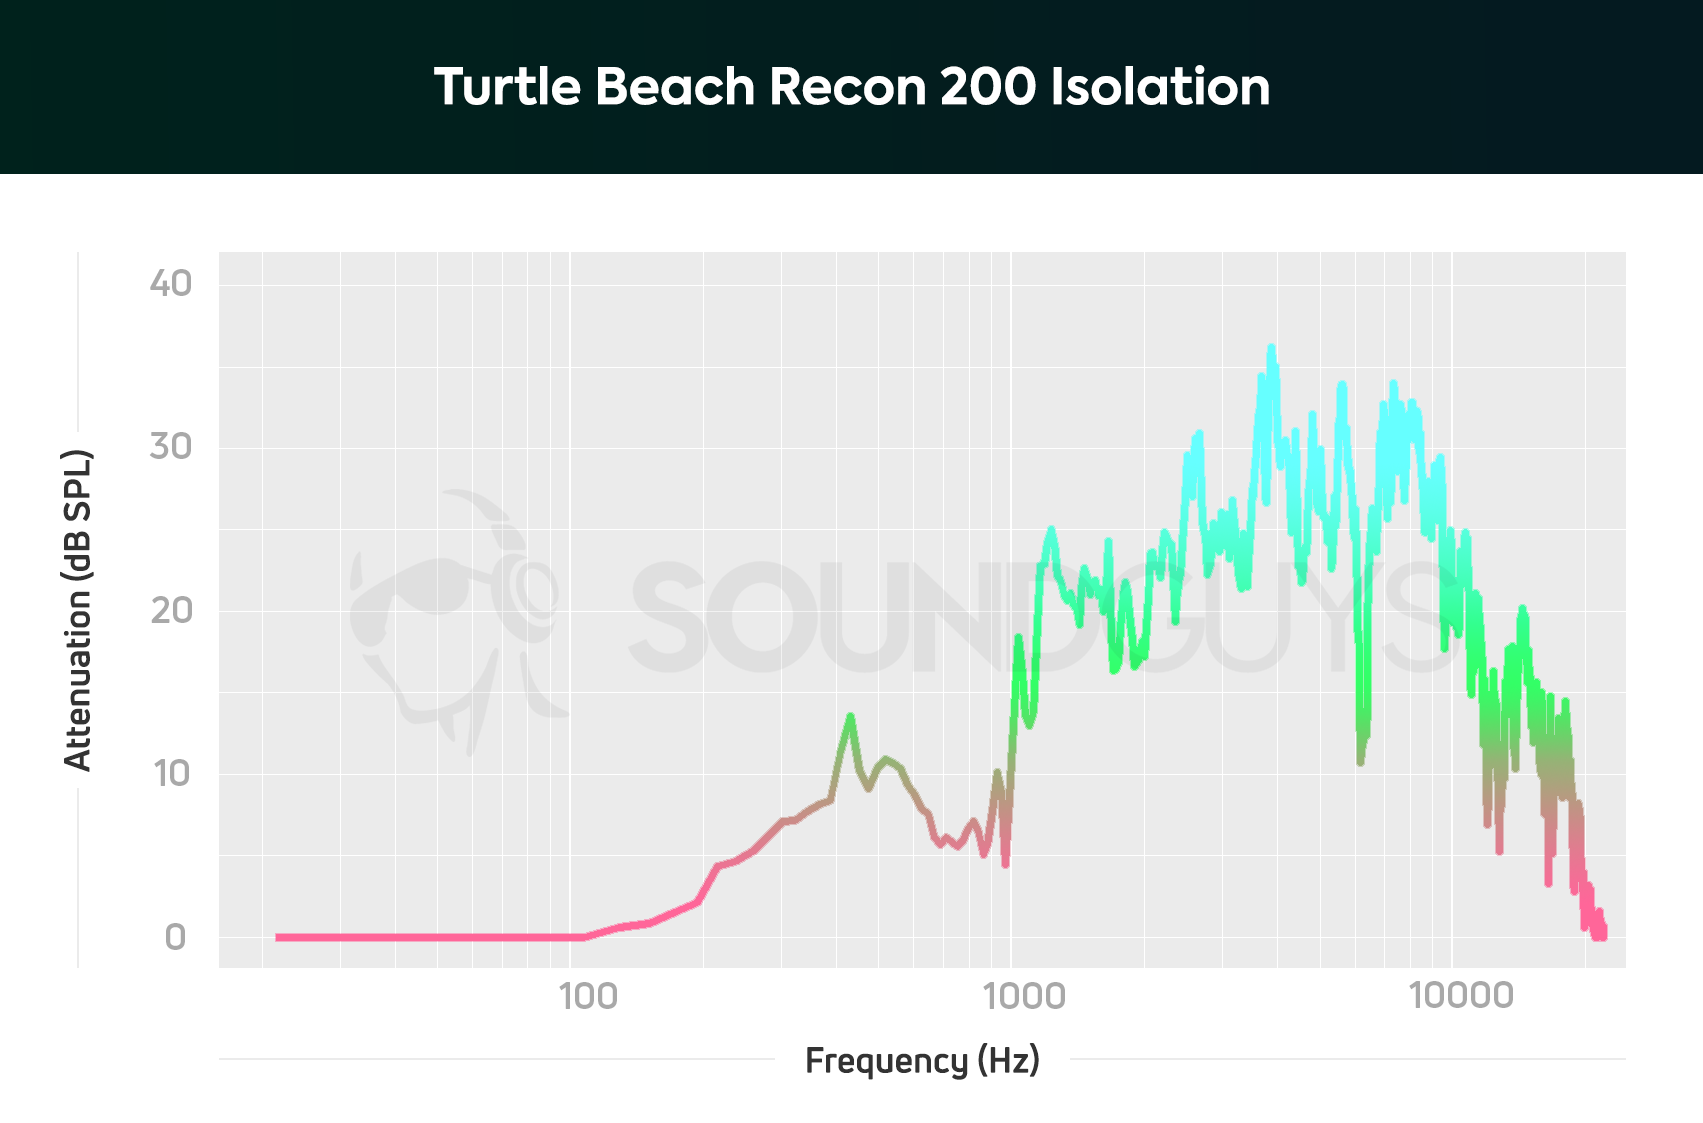 An isolation chart for the Turtle Beach Recon 200, which shows a moderate level of attenuation for the 